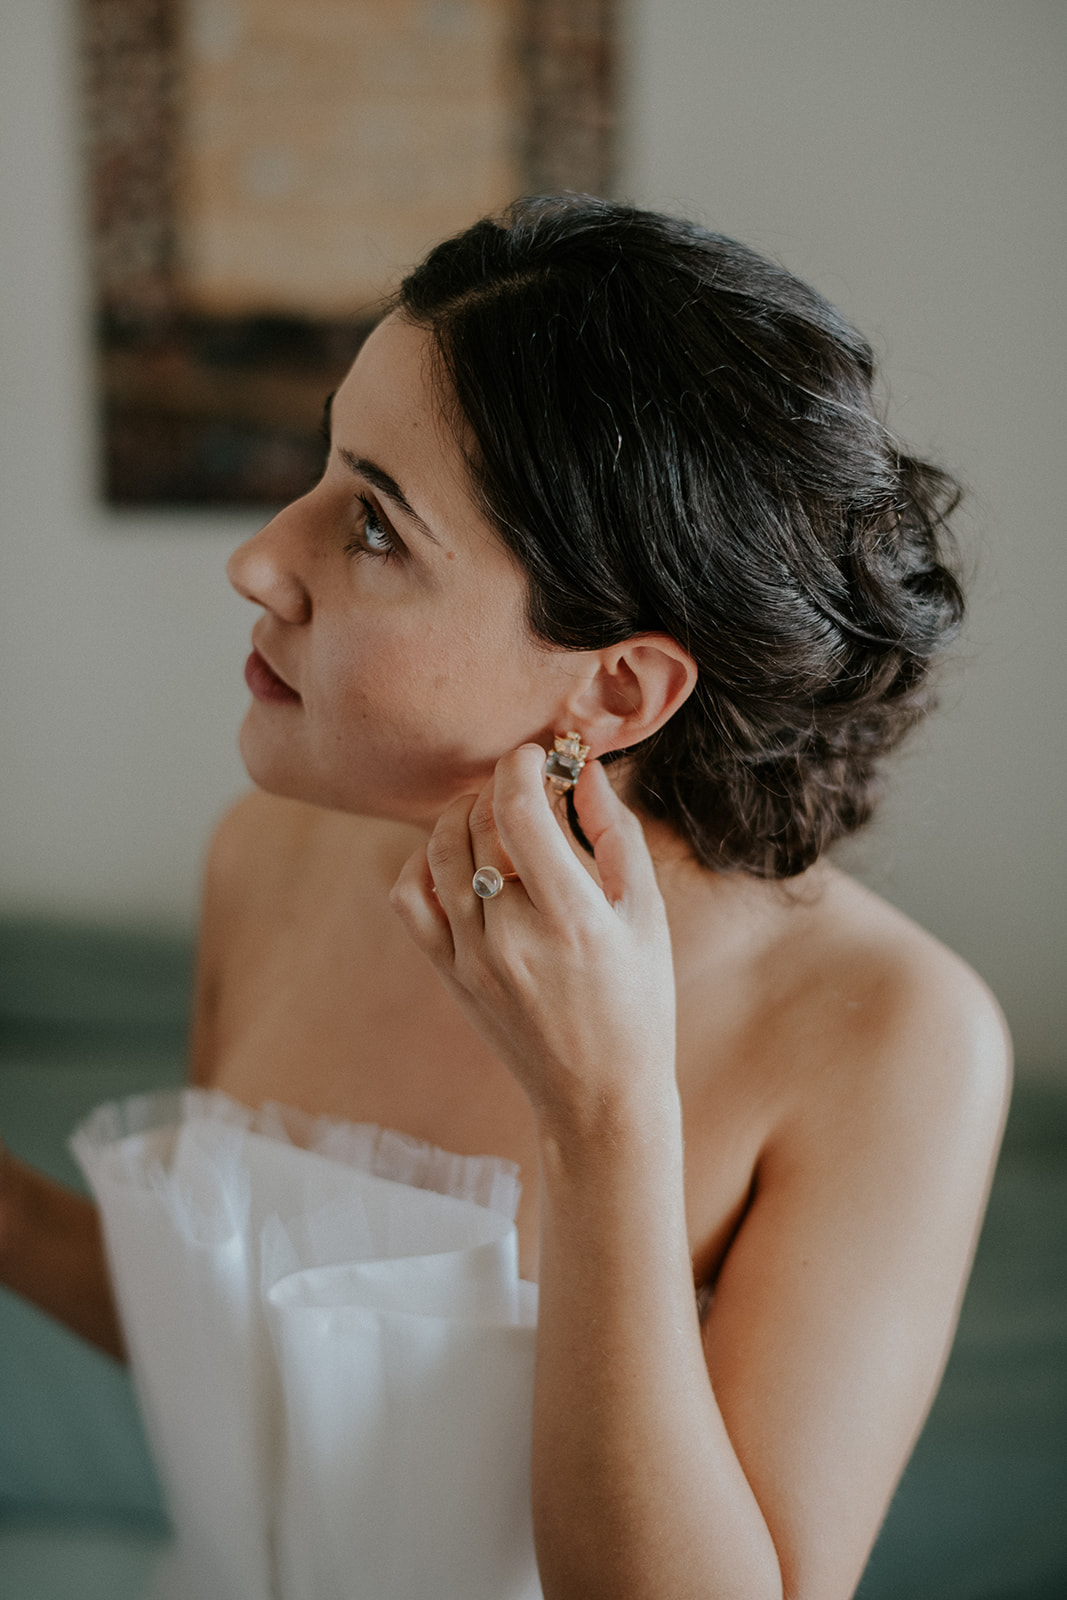 the bride puts earrings on